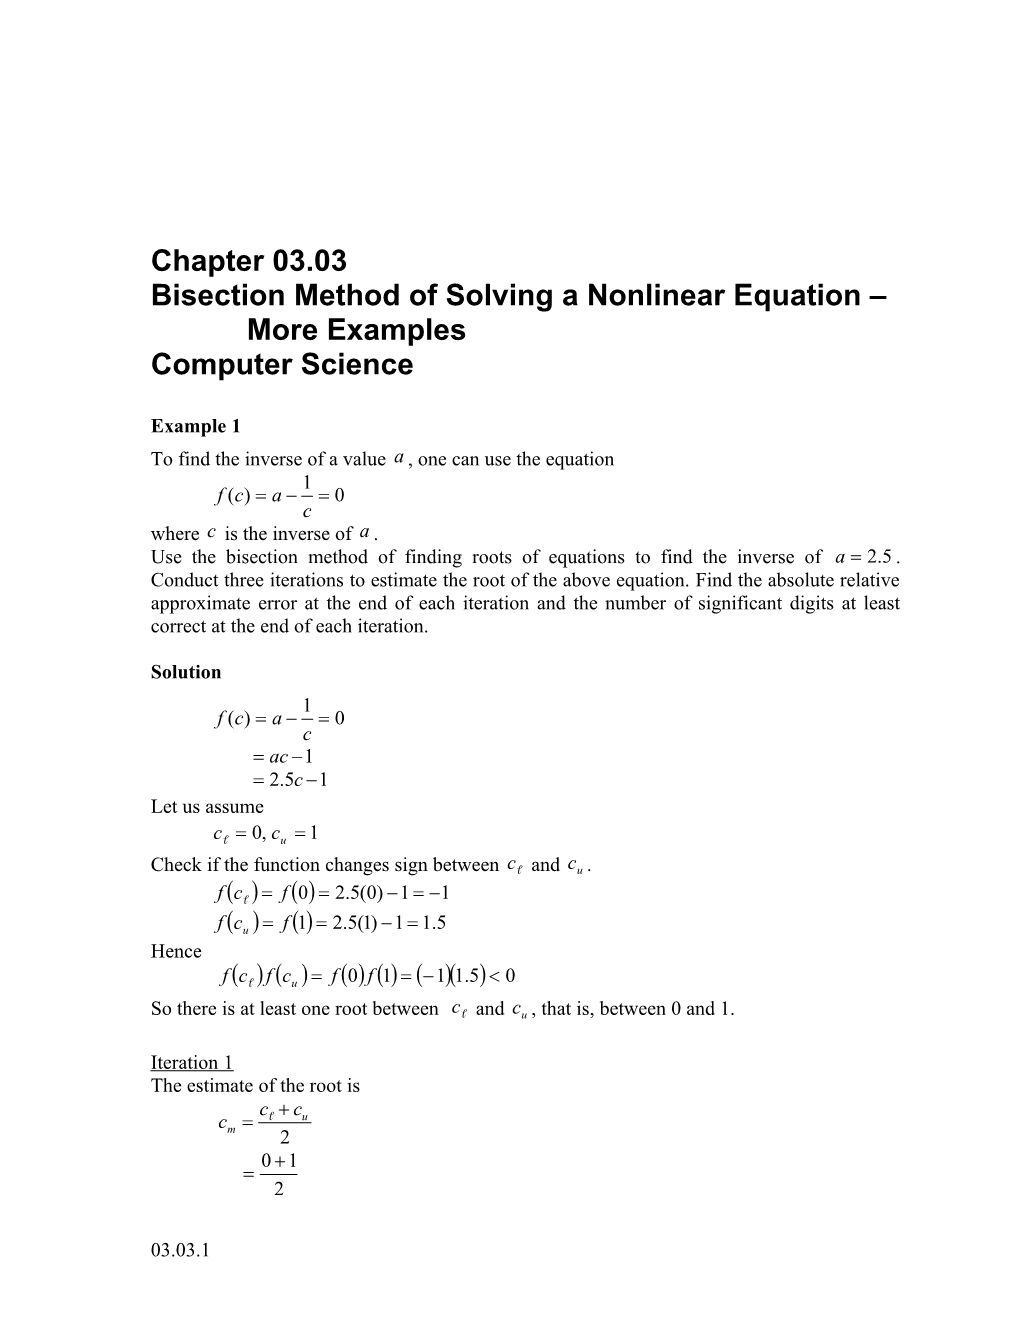 Bisection Method of Solving a Nonlinear Equation More Examples: Computer Science